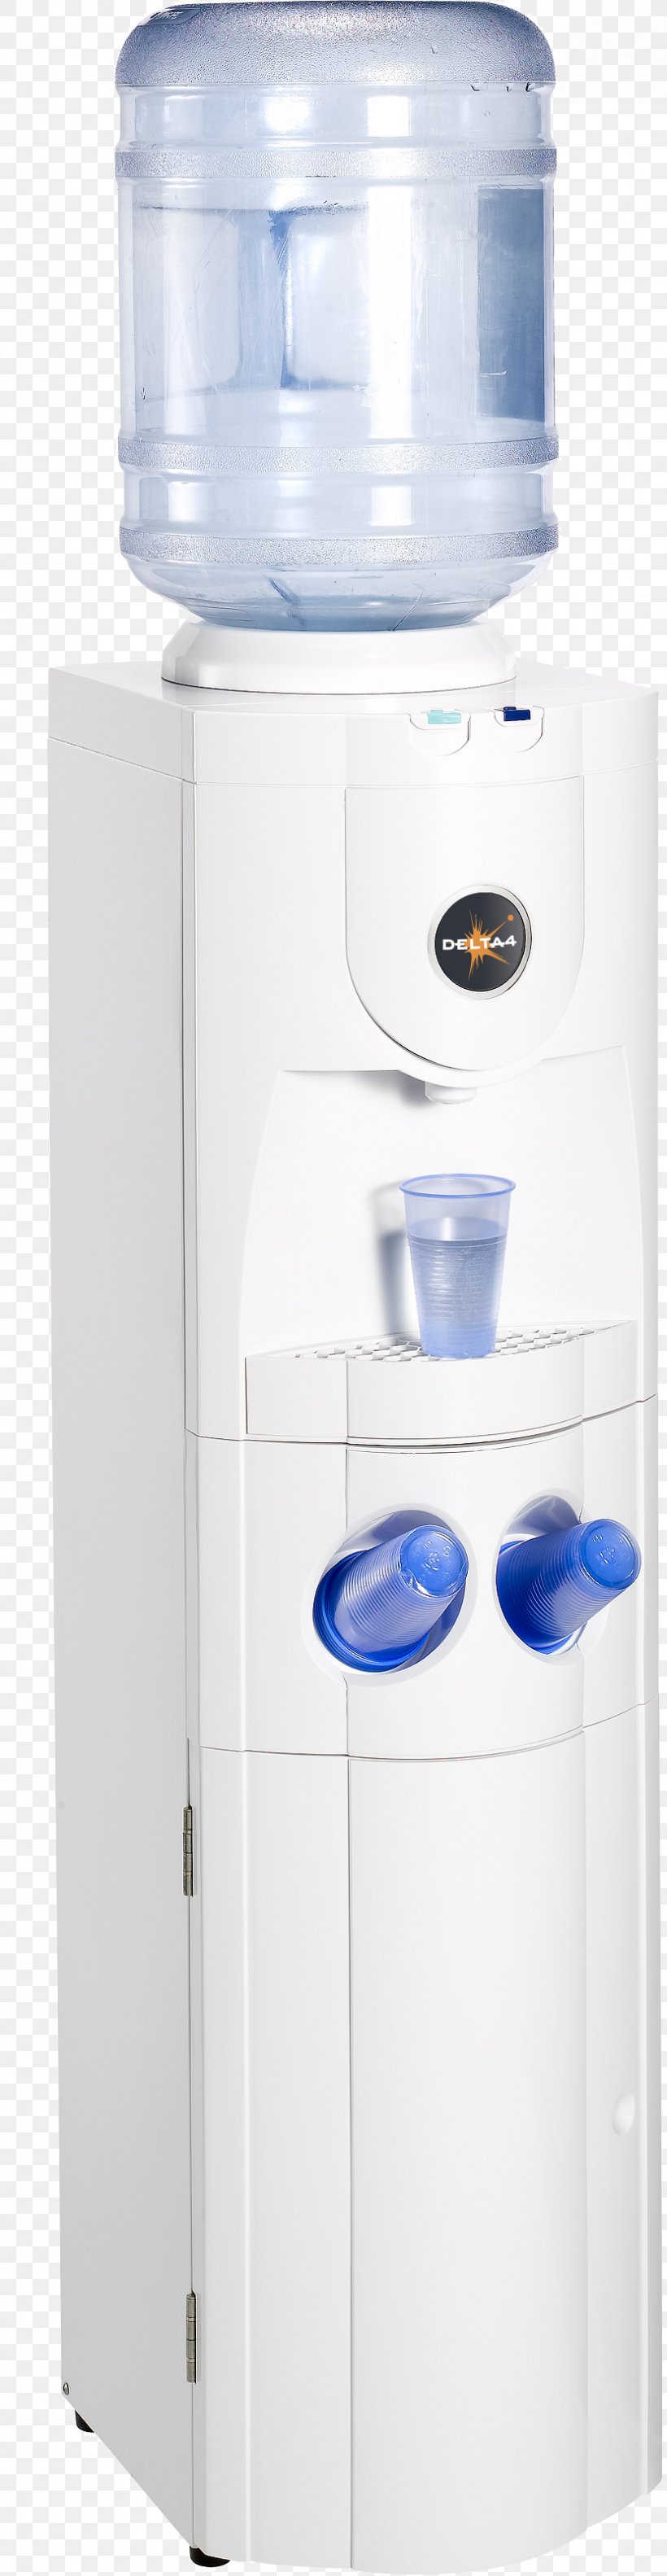 Water Cooler Major Appliance, PNG, 830x3204px, Water Cooler, Cooler, Home Appliance, Kitchen Appliance, Major Appliance Download Free